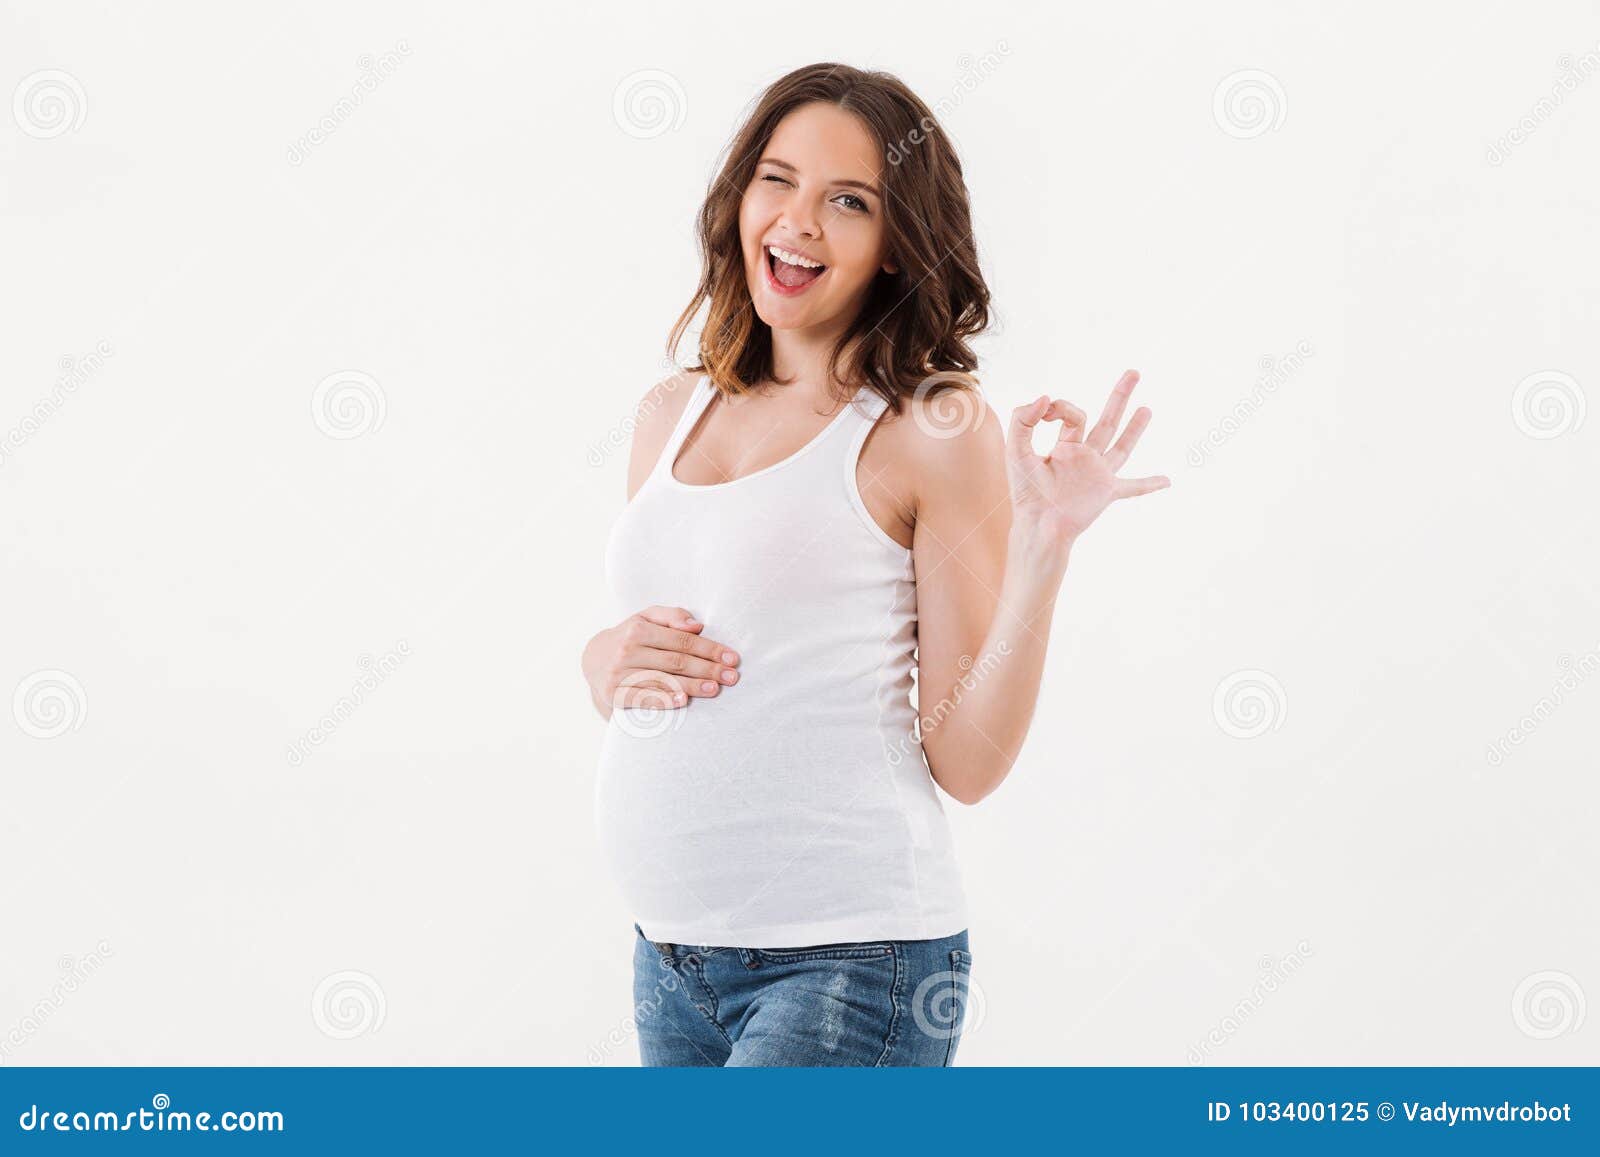 cheerful pregnant woman showing okay gesture.